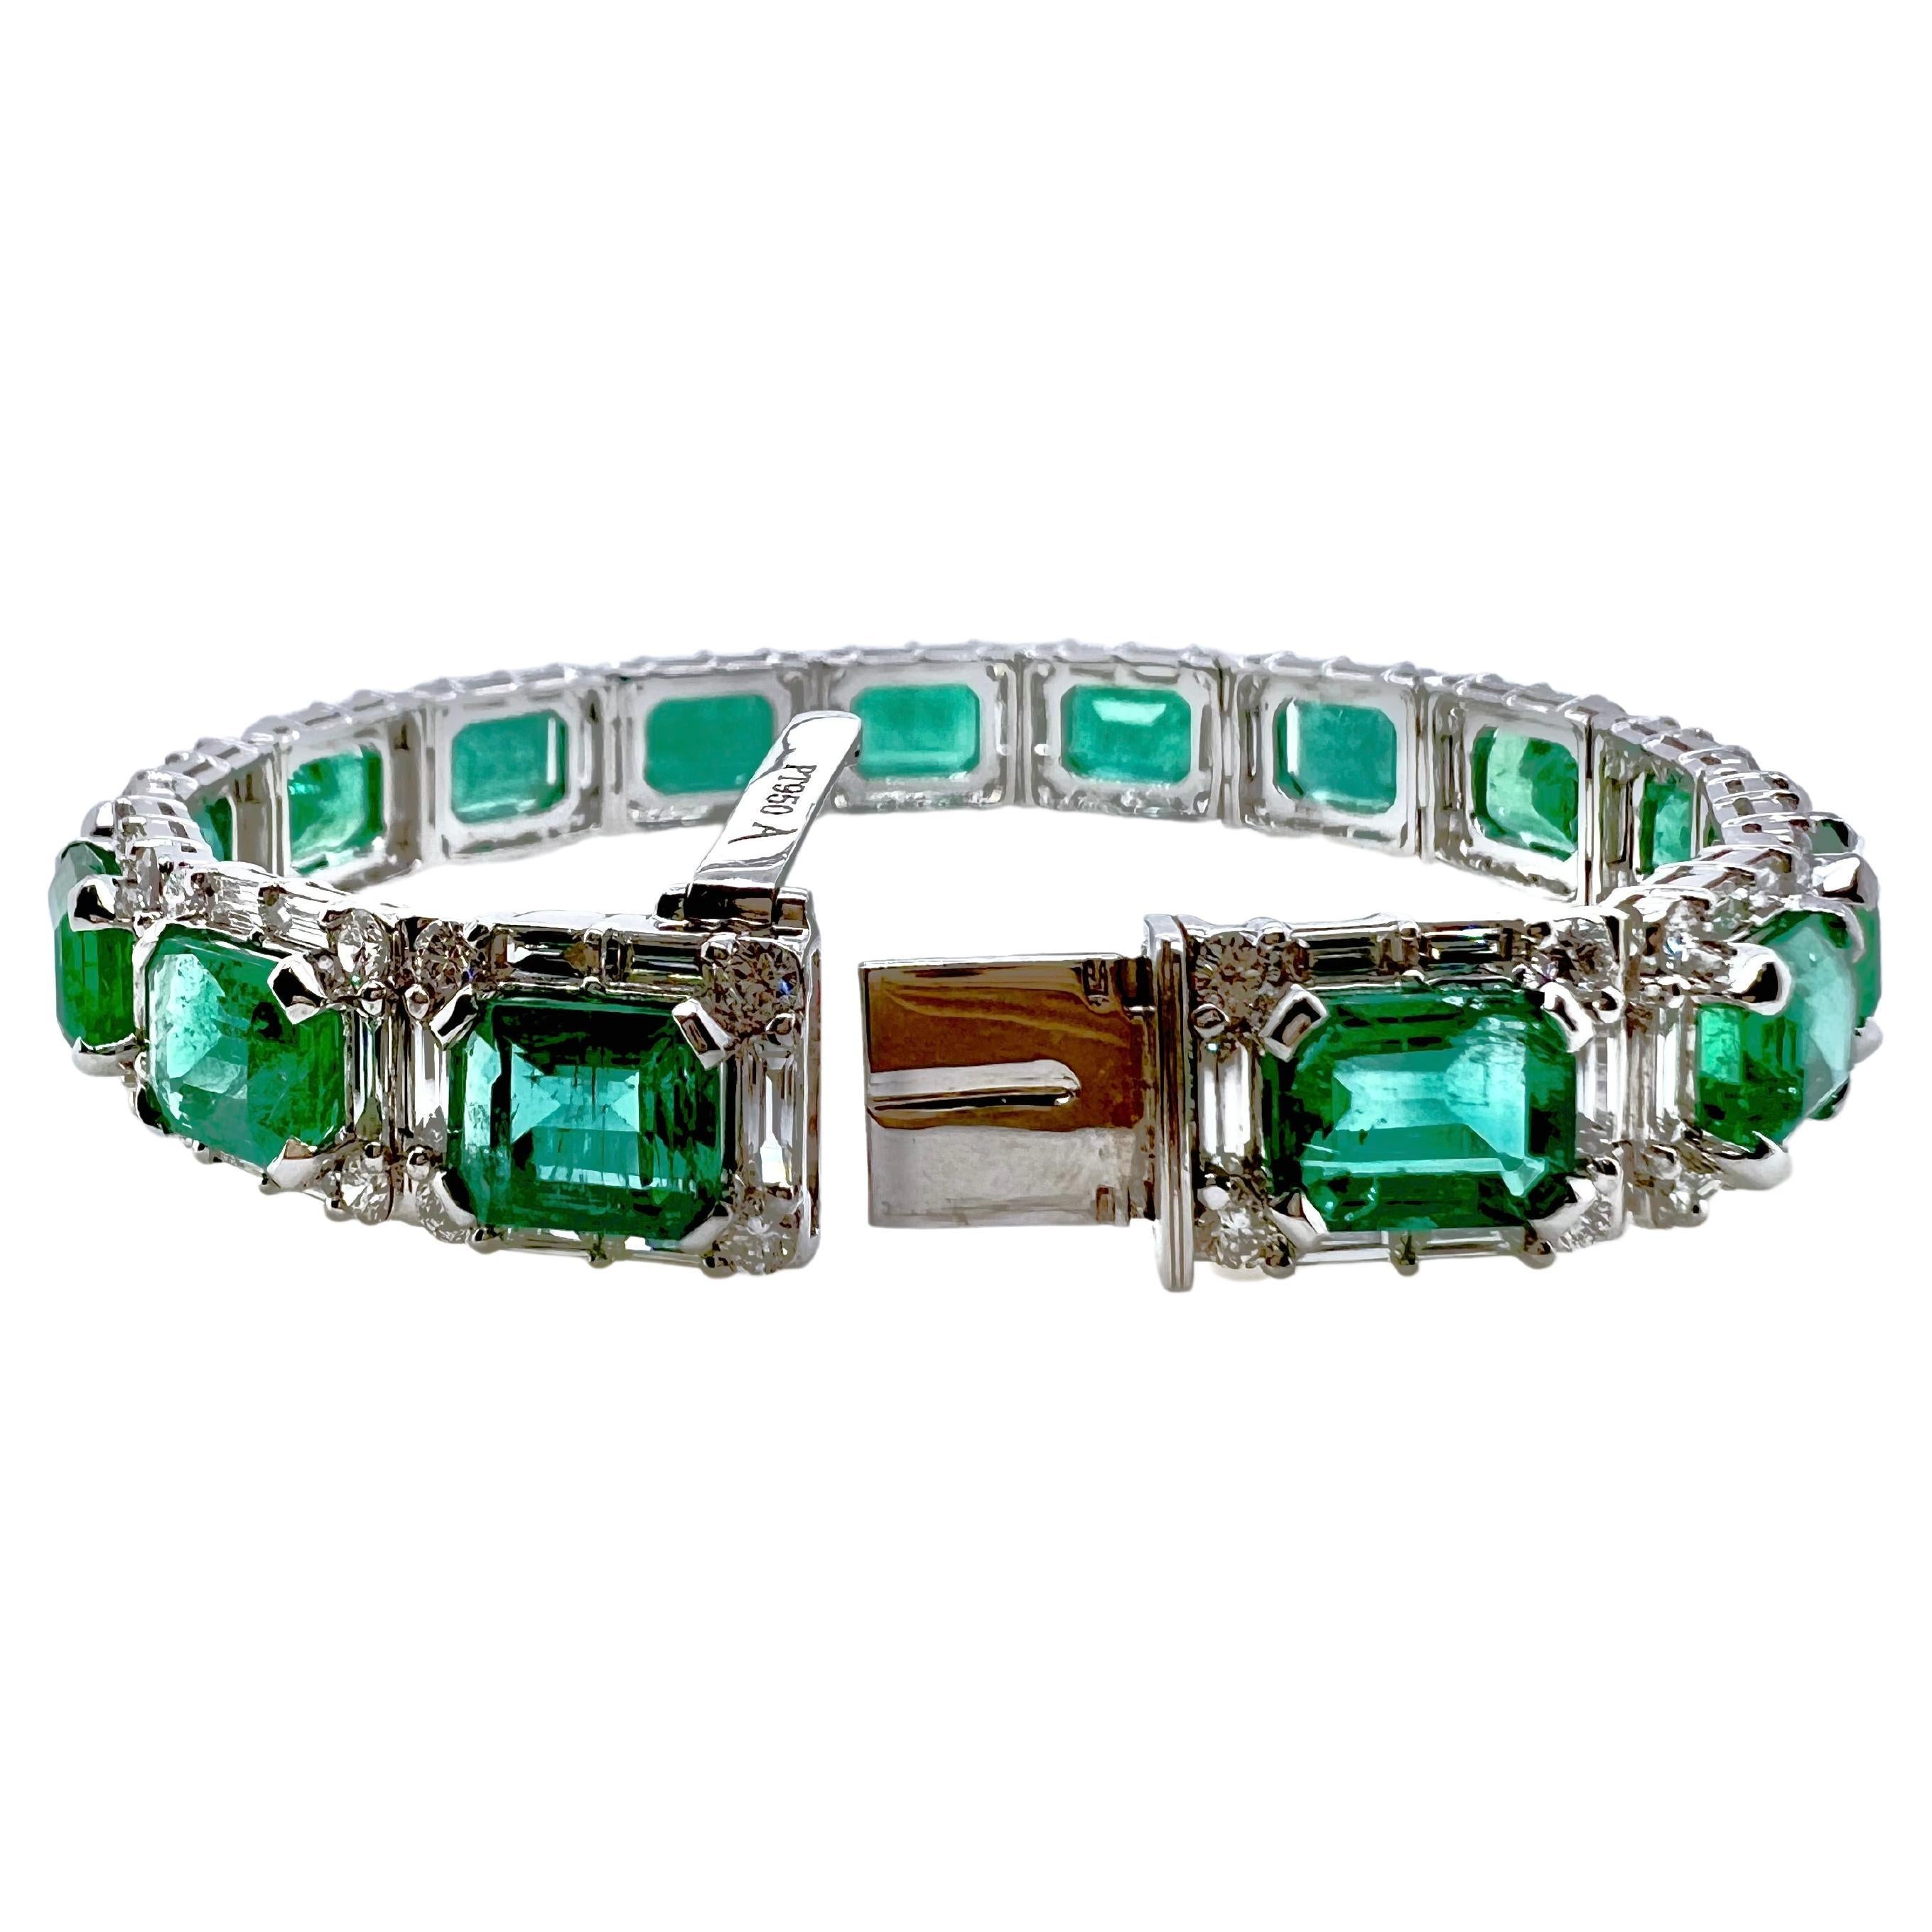 This stunning emerald is an absolute must for the emerald lovers.  The handmade setting for the emeralds truly exhibit the quality and workmanship.  The platinum setting contains the baguette and round diamonds that housed the vibrant, emerald cut